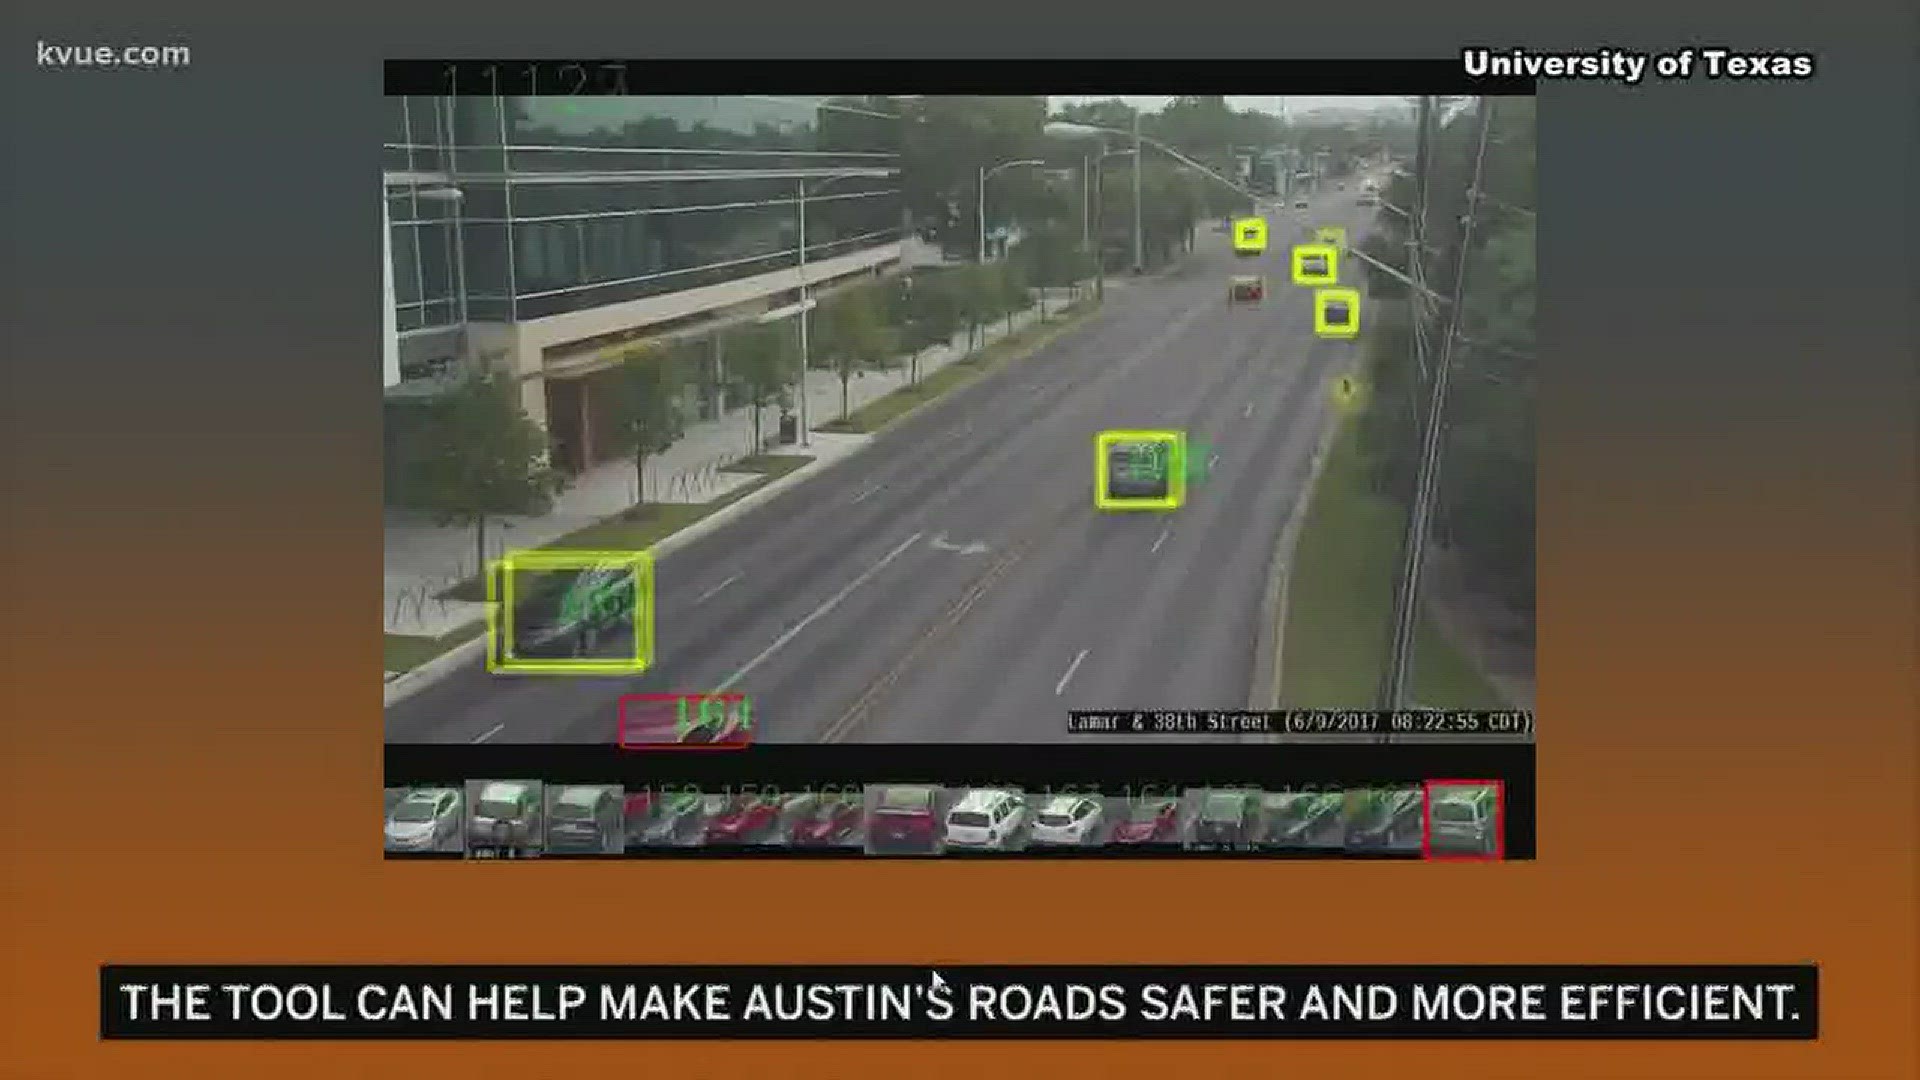 Researchers at the University of Texas are using artificial intelligence to help Austin's traffic problems.